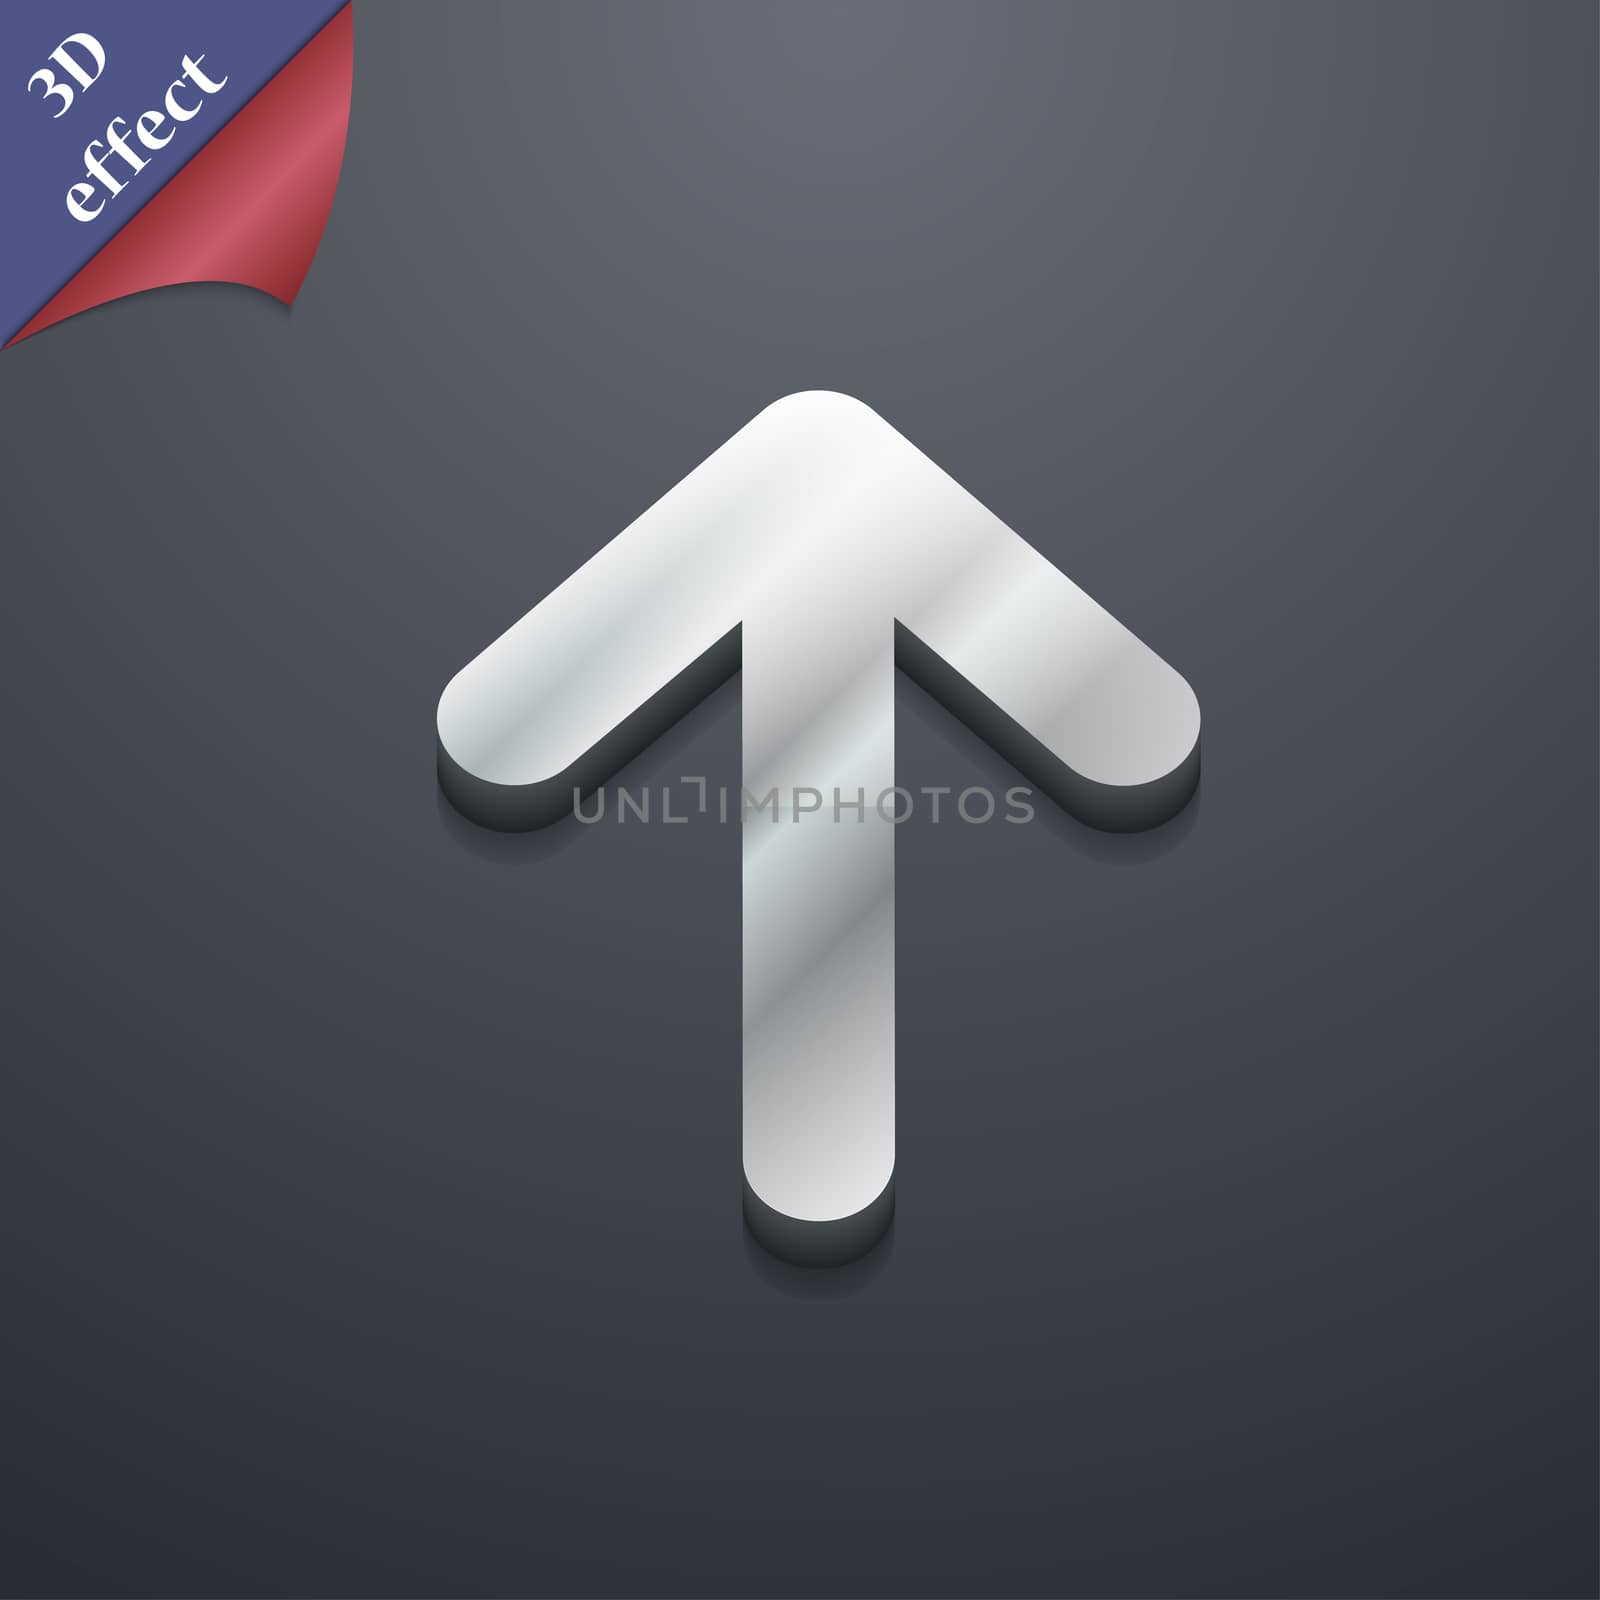 Arrow up, This side up icon symbol. 3D style. Trendy, modern design with space for your text illustration. Rastrized copy